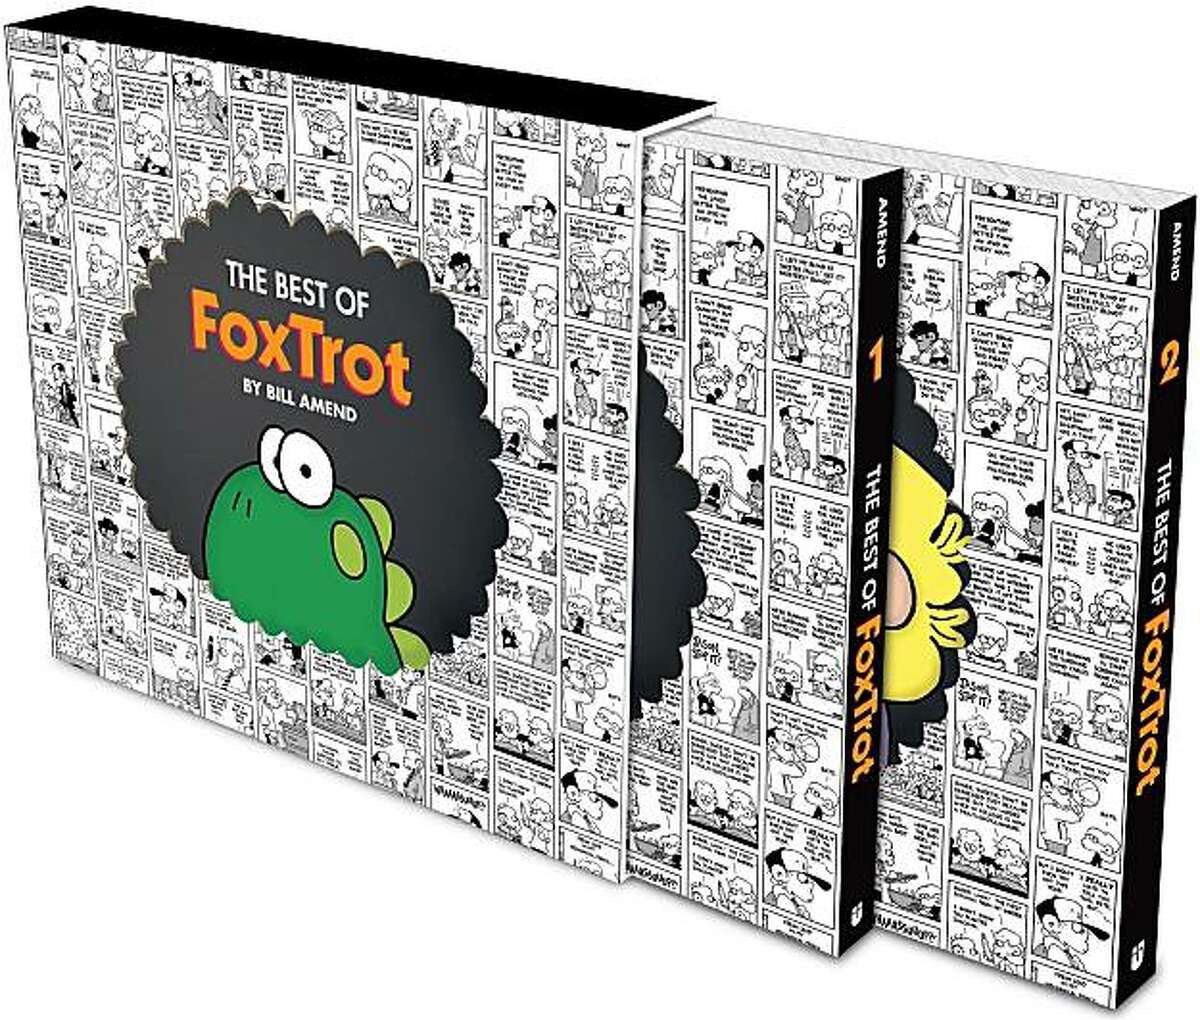 Bill Amend Has Foxtrot Down To Science 20 Years On